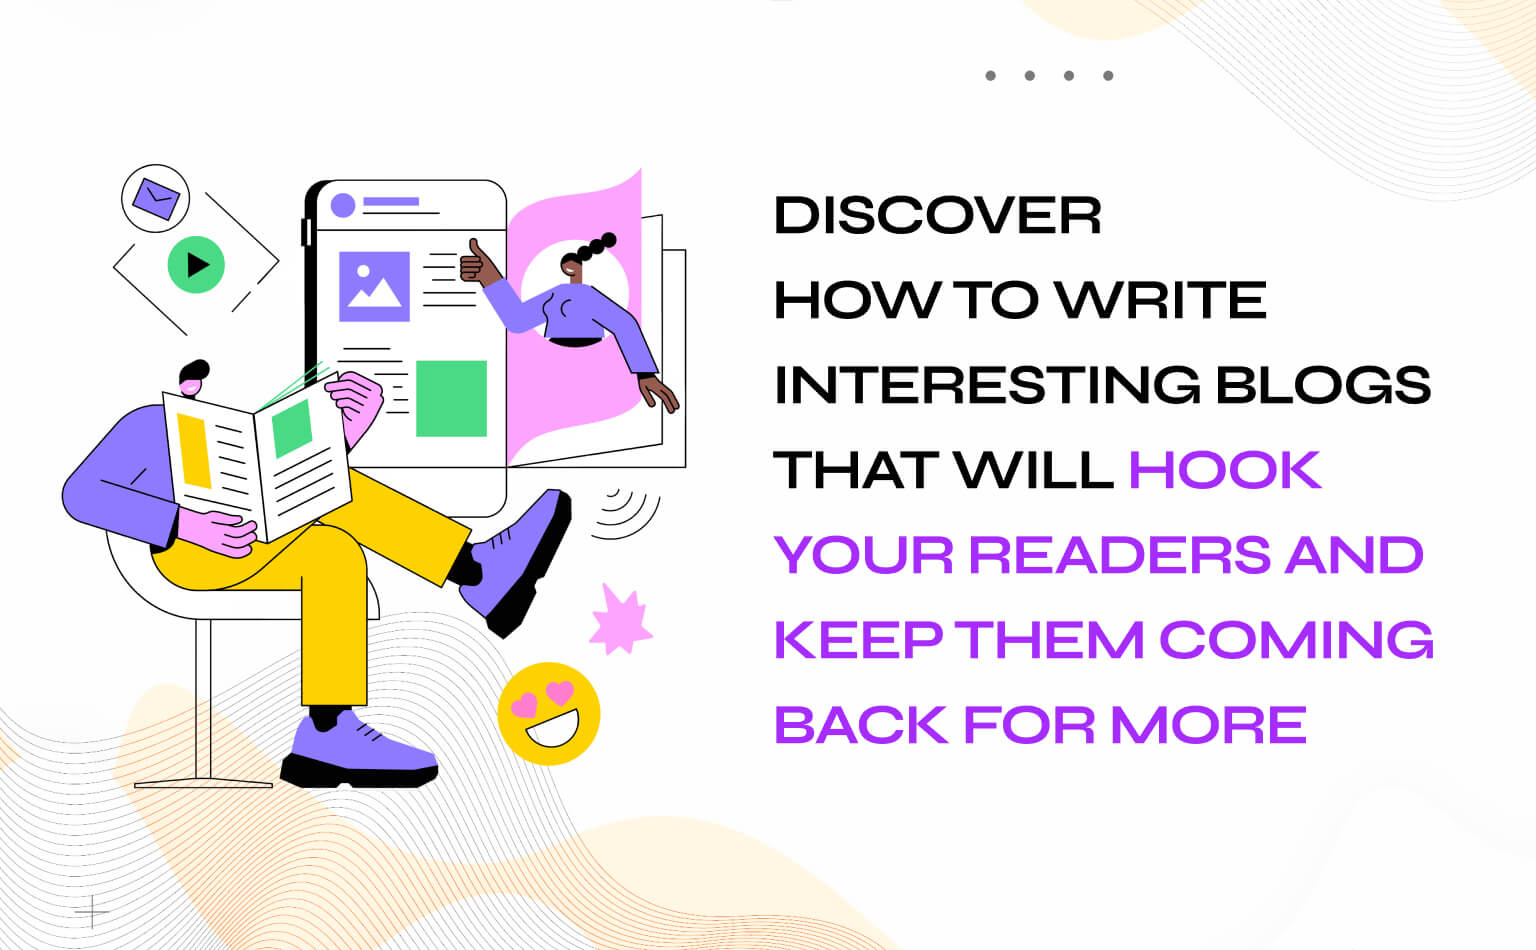 Discover how to write interesting blogs that will hook your readers and keep them coming back for more